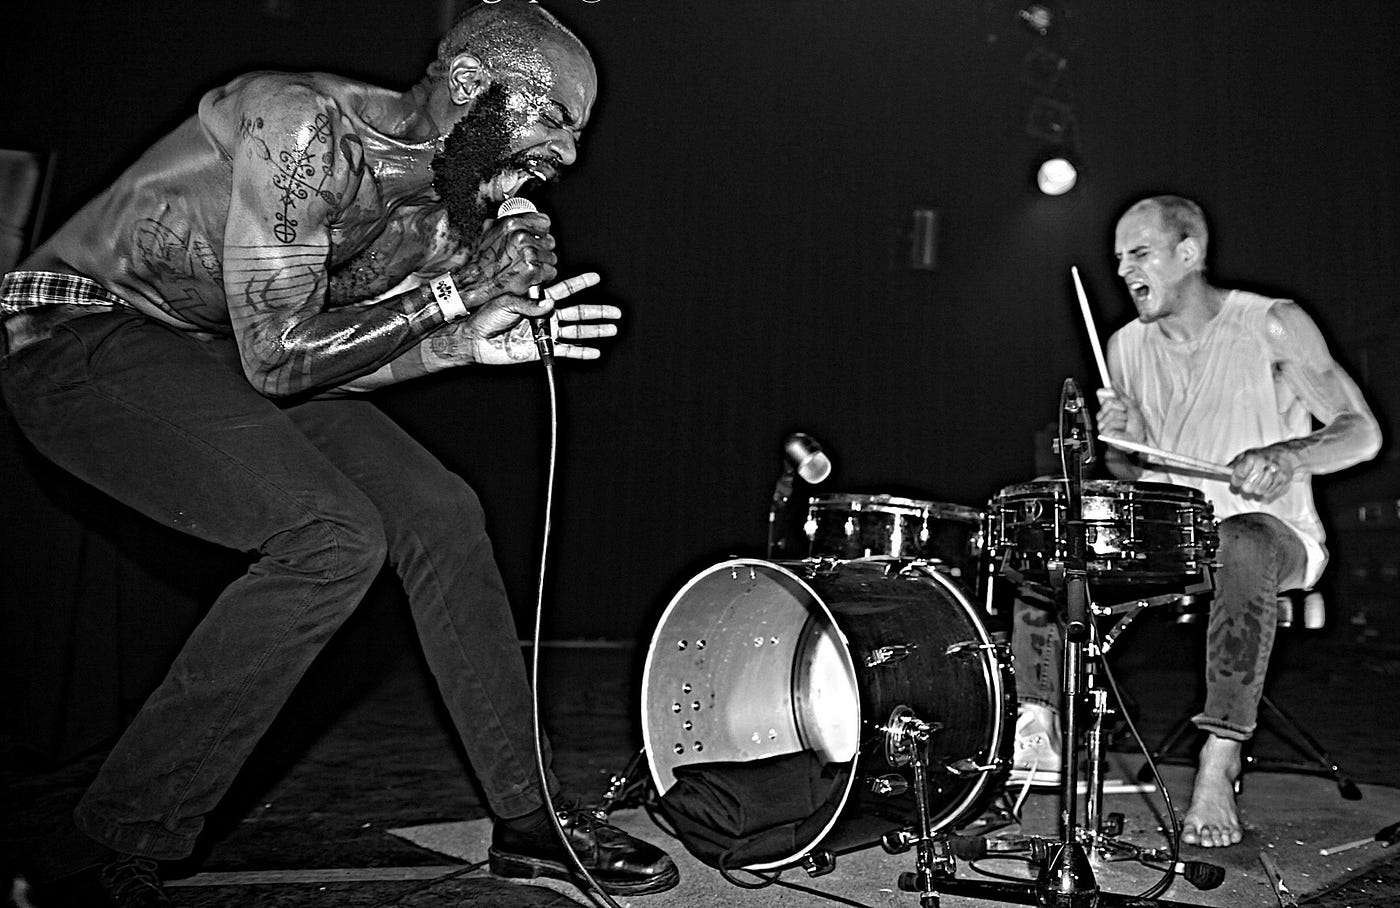 Searching for the Death Grips movie | by Harrison Whitaker | Medium